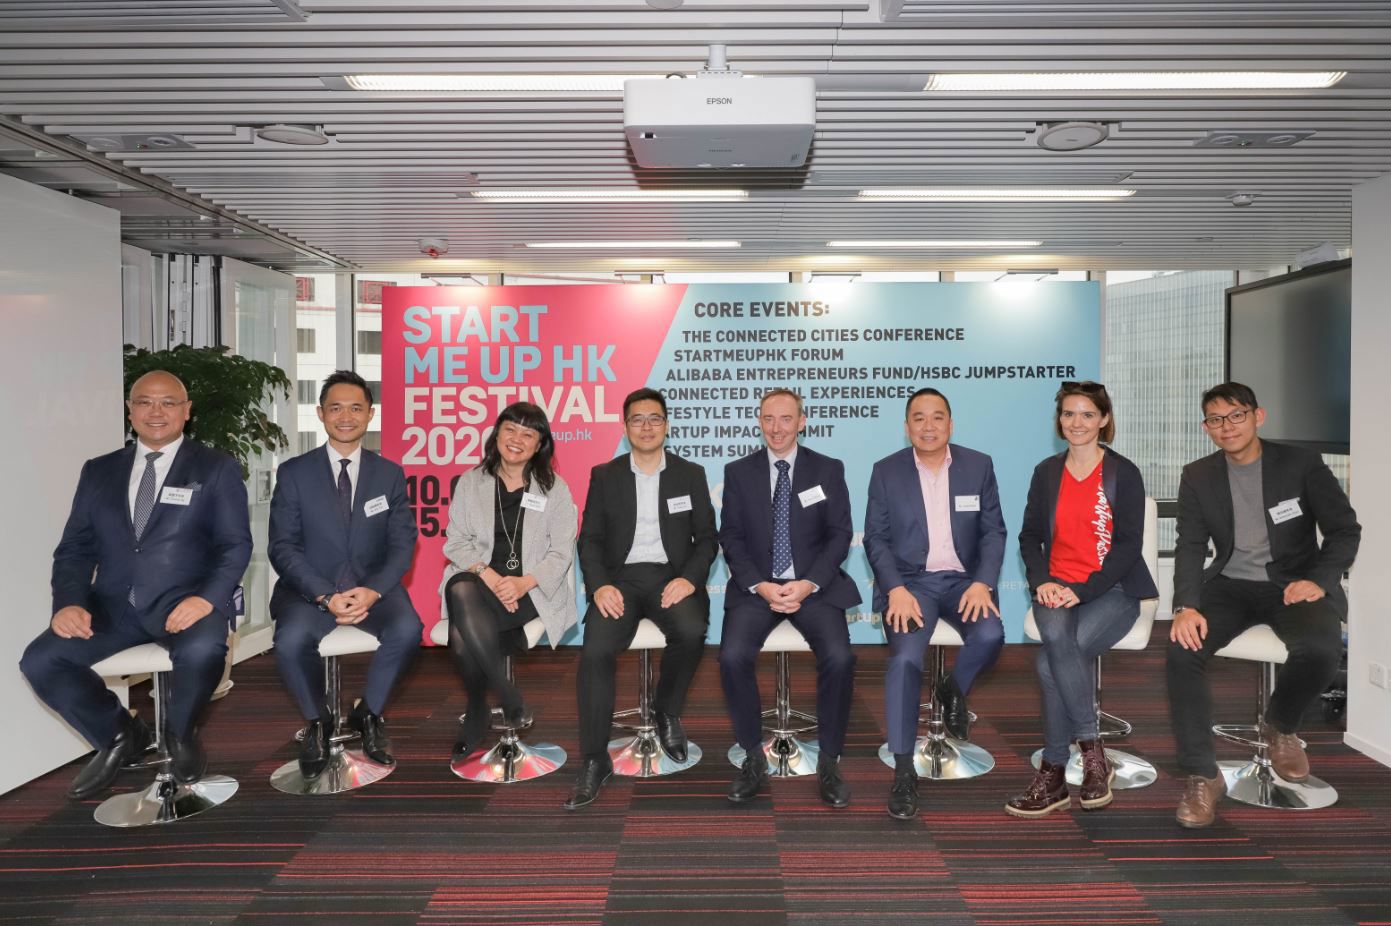 Invest Hong Kong (InvestHK) hosted a media briefing today (20 January 2020) to announce core events of the extended StartmeupHK Festival 2020. From left: Associate Director-General of Investment Promotion at InvestHK Mr Charles Ng; Partner, Smart City Group, KPMG China, Mr Alan Yau; the Head of StartmeupHK at InvestHK, Ms Jayne Chan; the Operations Director of Alibaba Entrepreneurs Fund, Mr Teddy Lui; the Founder and CEO of Bailey Communications HK, Mr Stuart Bailey; the Managing Director of Jumpstart Media, Mr James Kwan; CEO and Co-founder of WHub Ms Karena Belin; and Co-director of the Mills Fabrica Mr Alexander Chan attend the briefing to announce the details of the StartmeupHK Festival 2020.